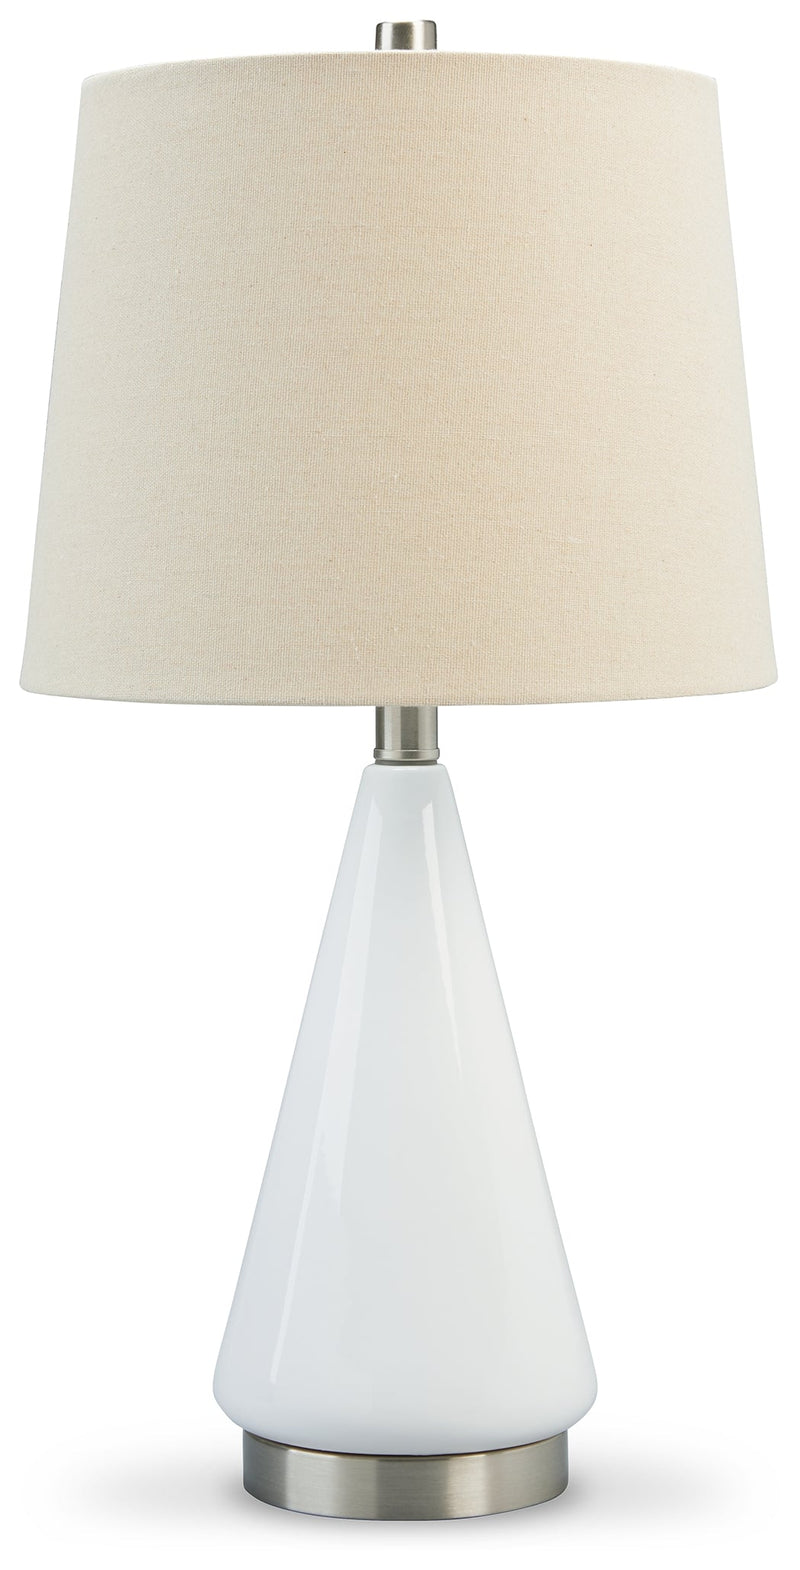 Ackson White/silver Finish Table Lamp (Set Of 2)